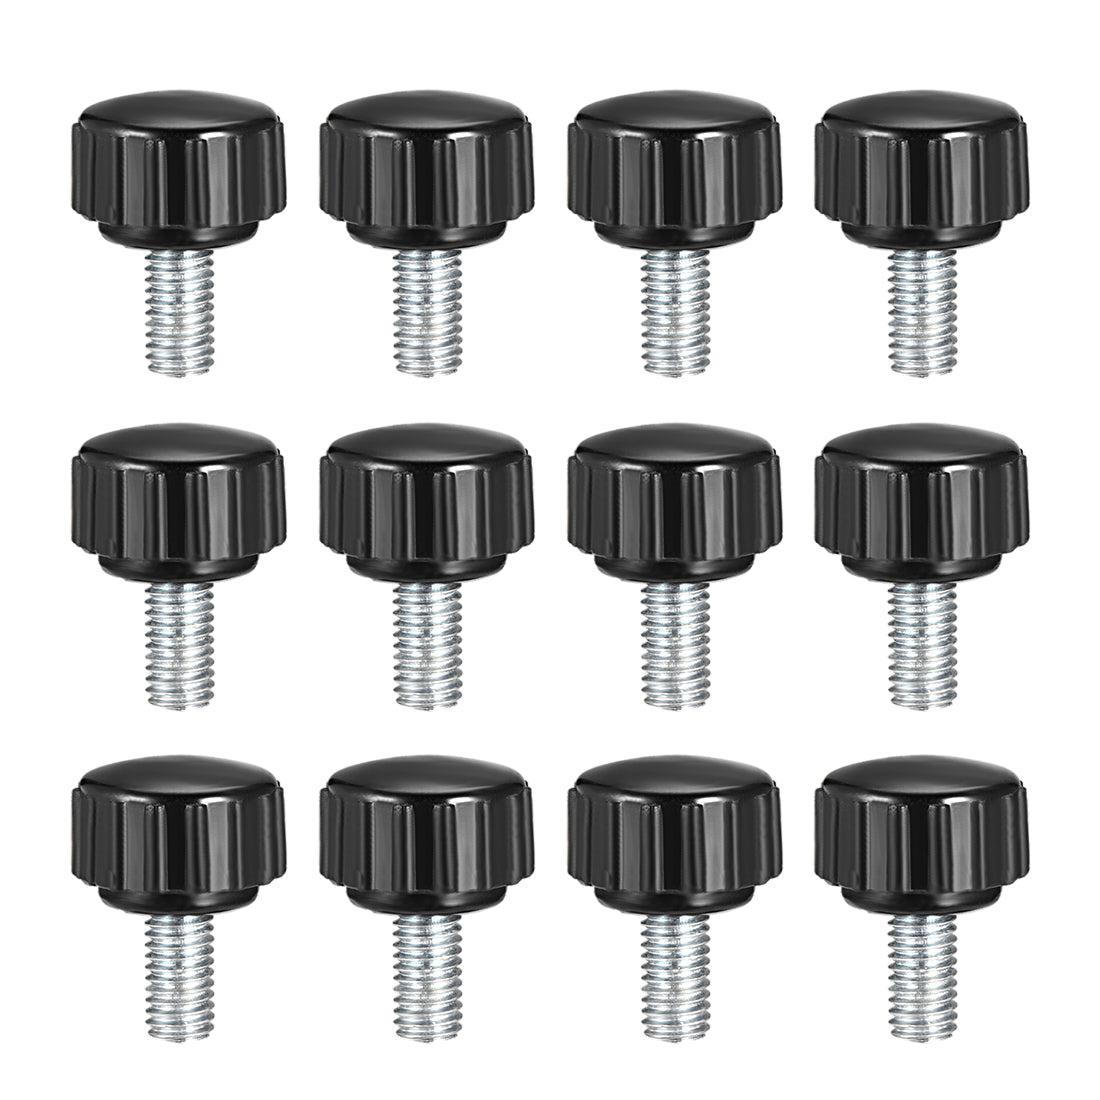 uxcell Uxcell Male Thread Knurled Clamping Knobs Grip Thumb Screw on Type 12 Pcs